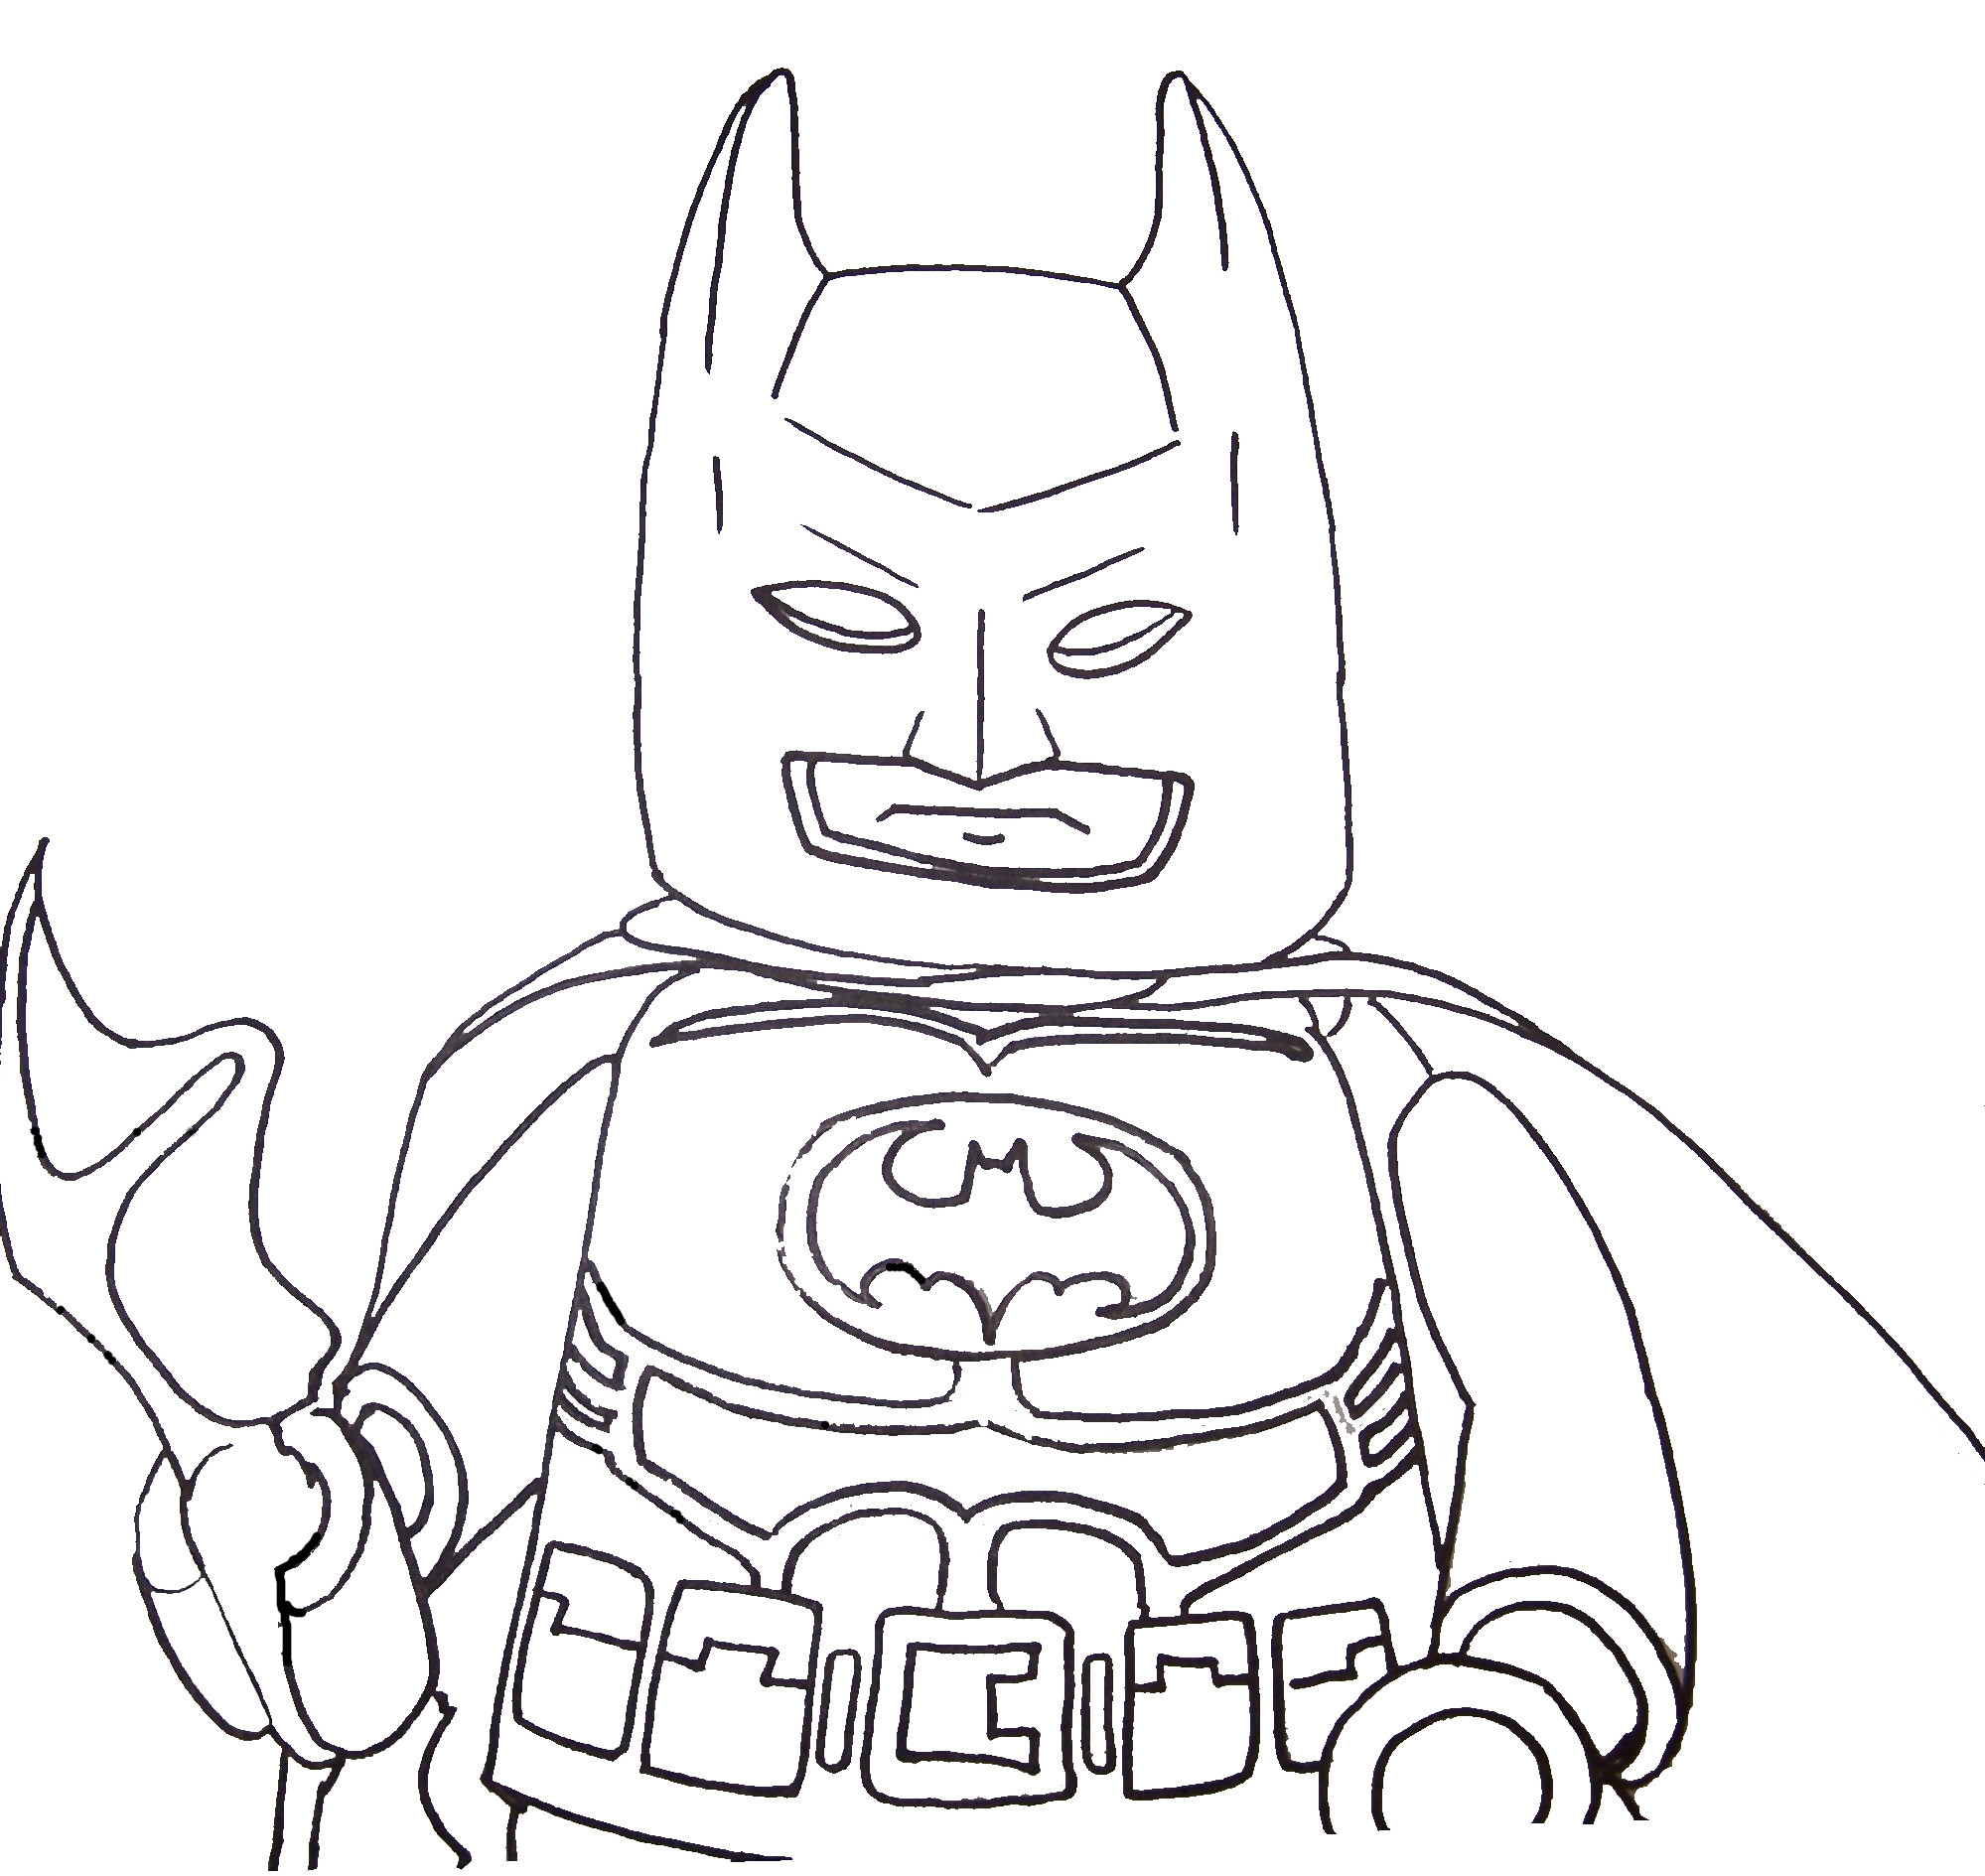 Batman Lego Coloring Pages For Boys
 Fun Free Printable Coloring Pages for Boys Including